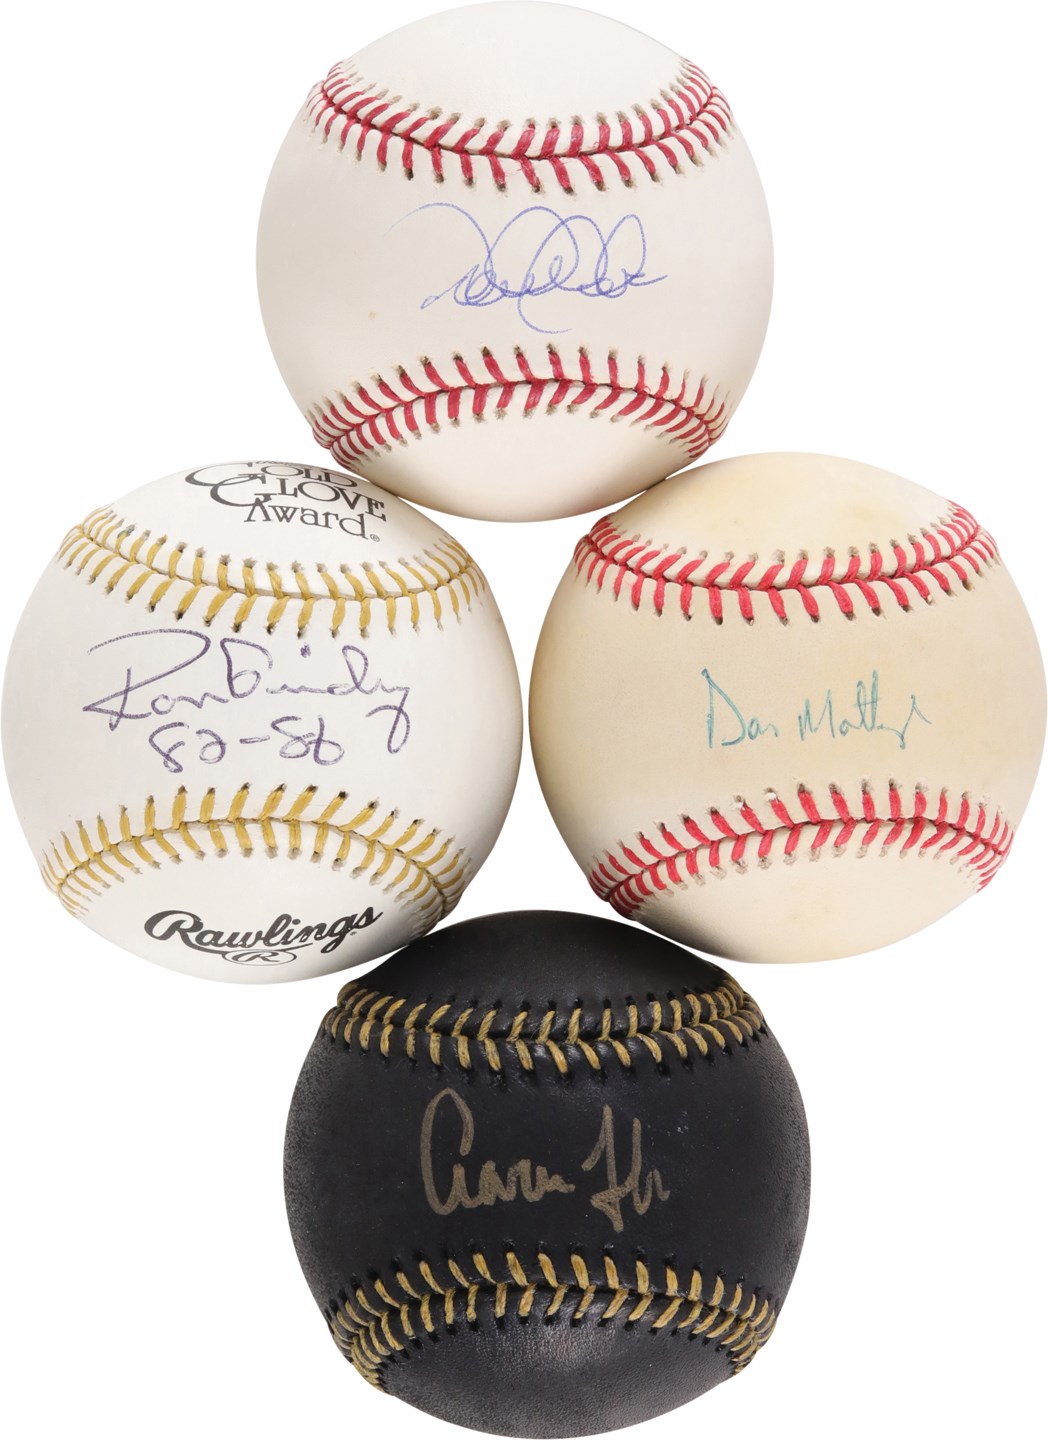 - New York Yankees Captains Single-Signed Baseball Collection - Jeter, Judge, Guidry, and Mattingly (4)